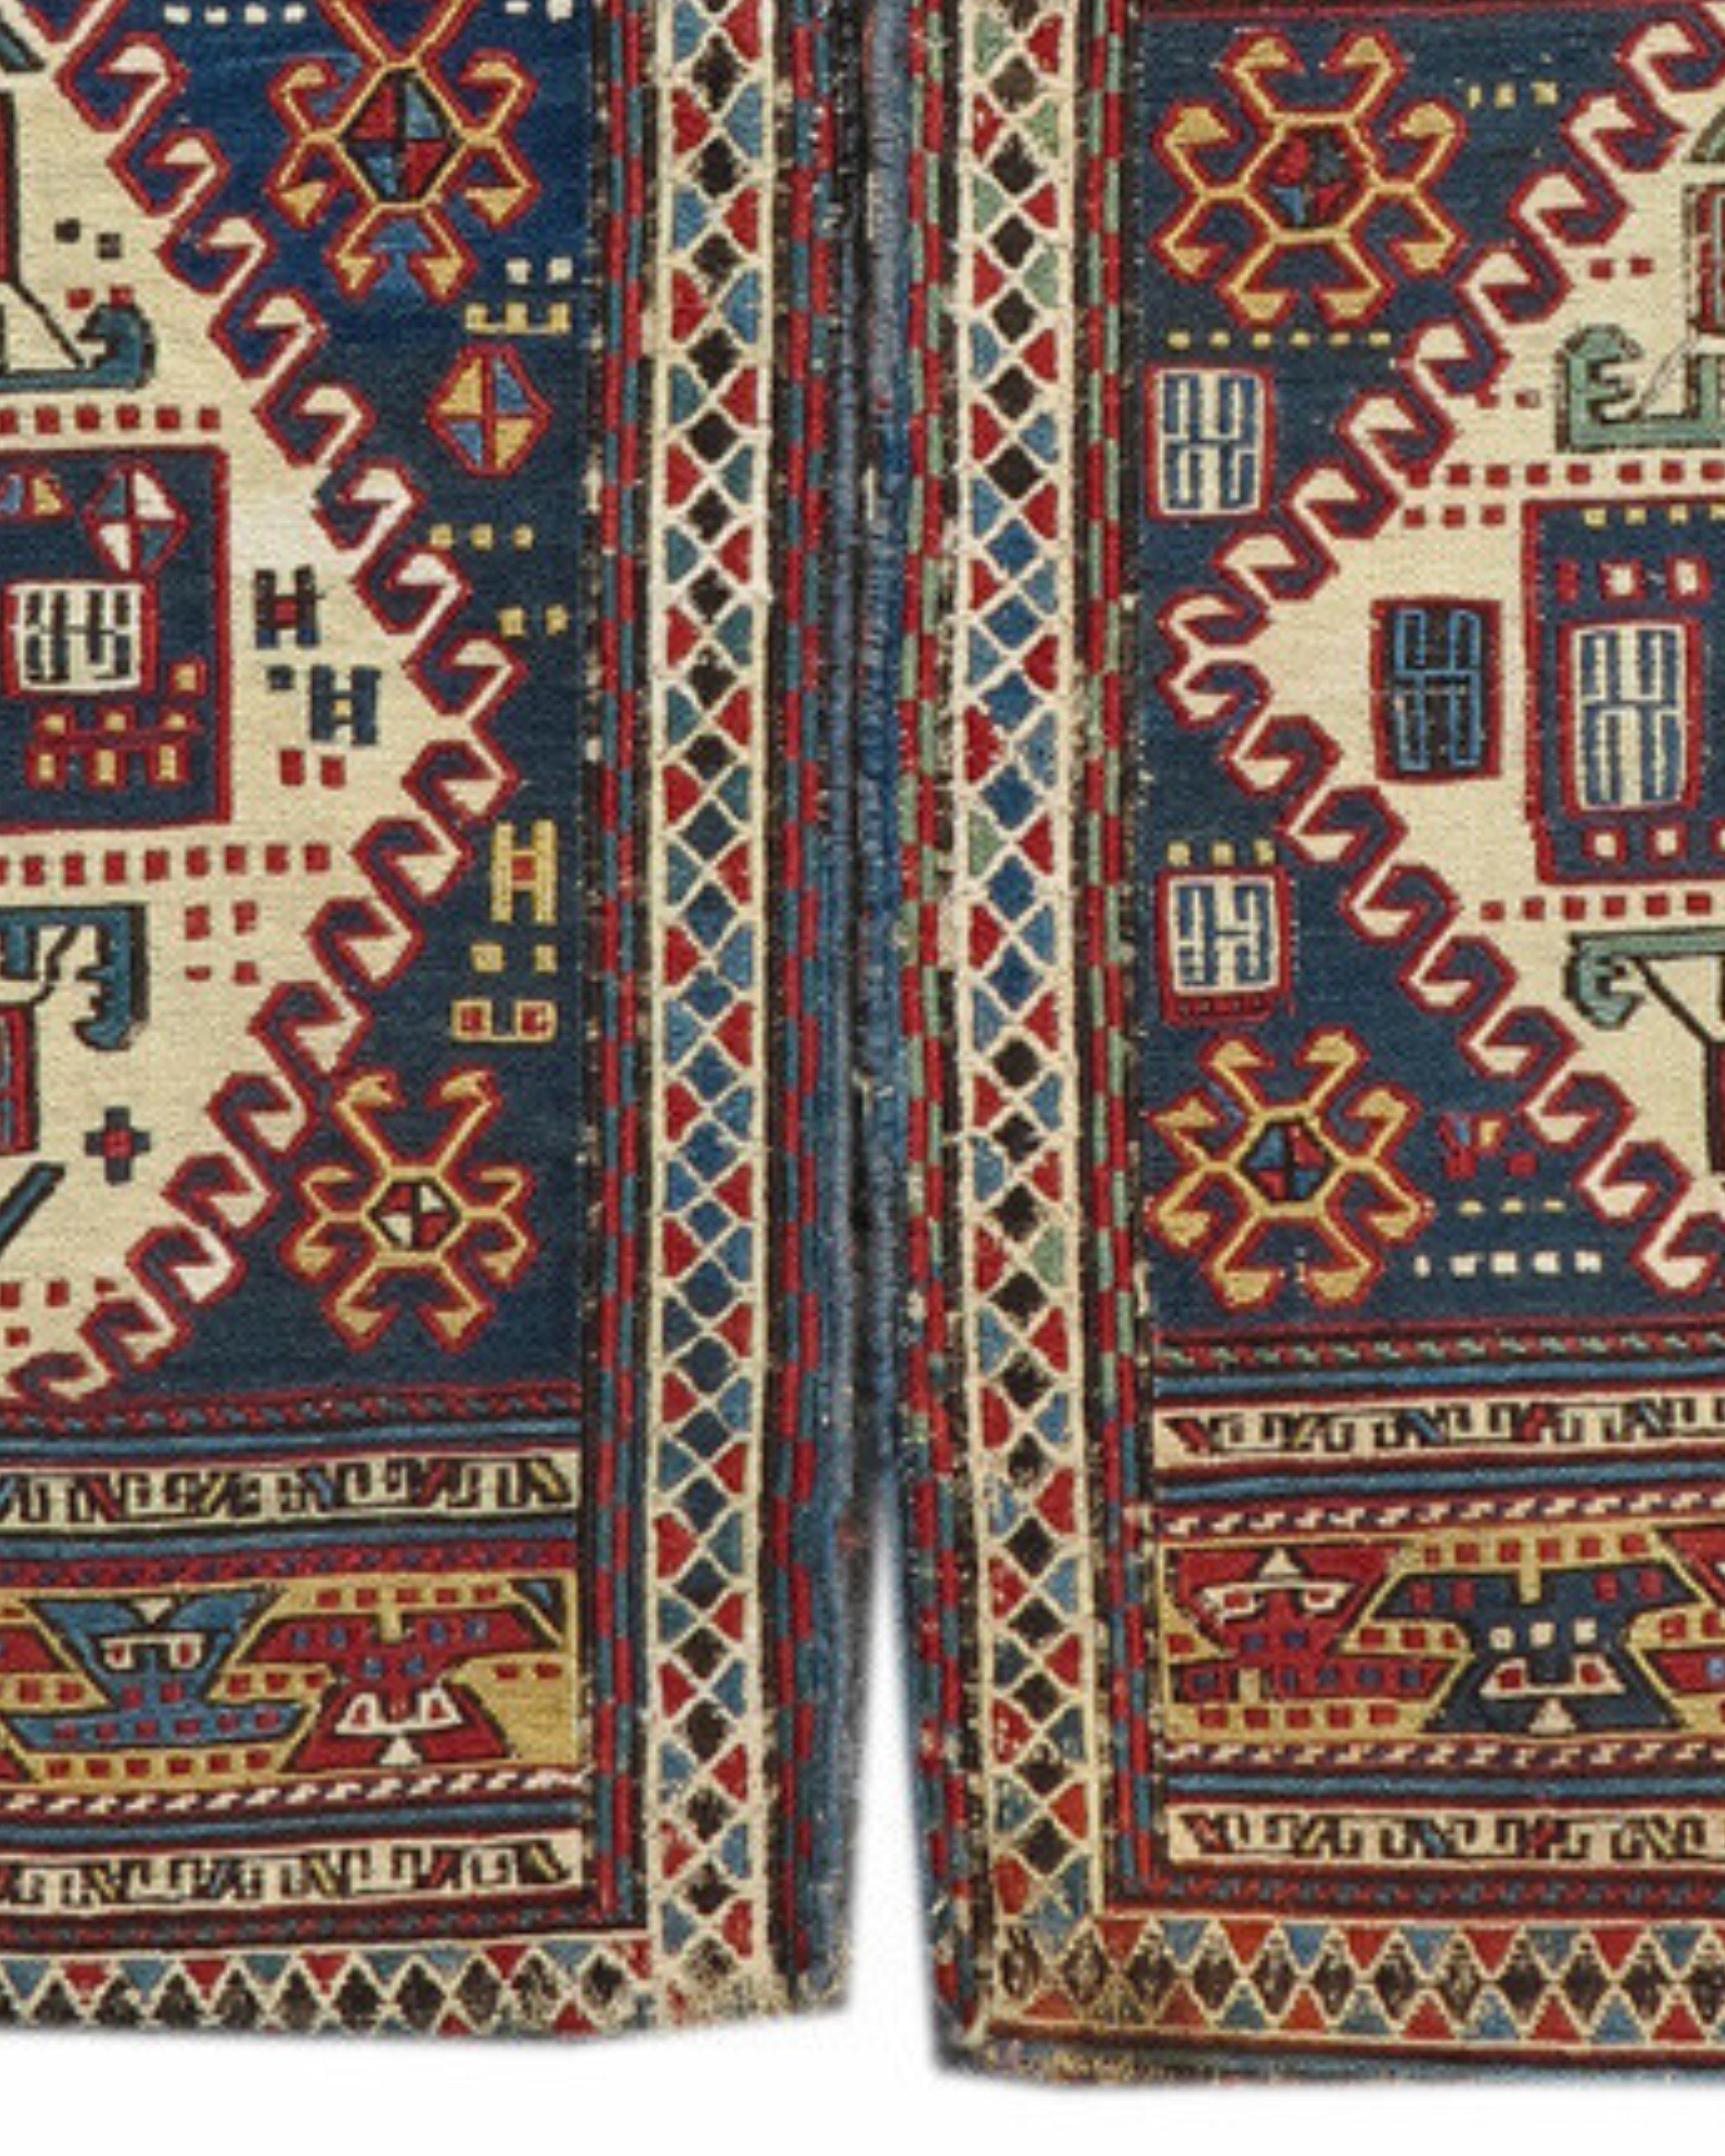 Pair of Antique Shahsavan Sumak Bags, 19th Century

This pair of sumak bags was most likely woven in the Karabagh region of the South Caucasus. A central medallion, composed of several active and colorful layers, is flanked on top and bottom by